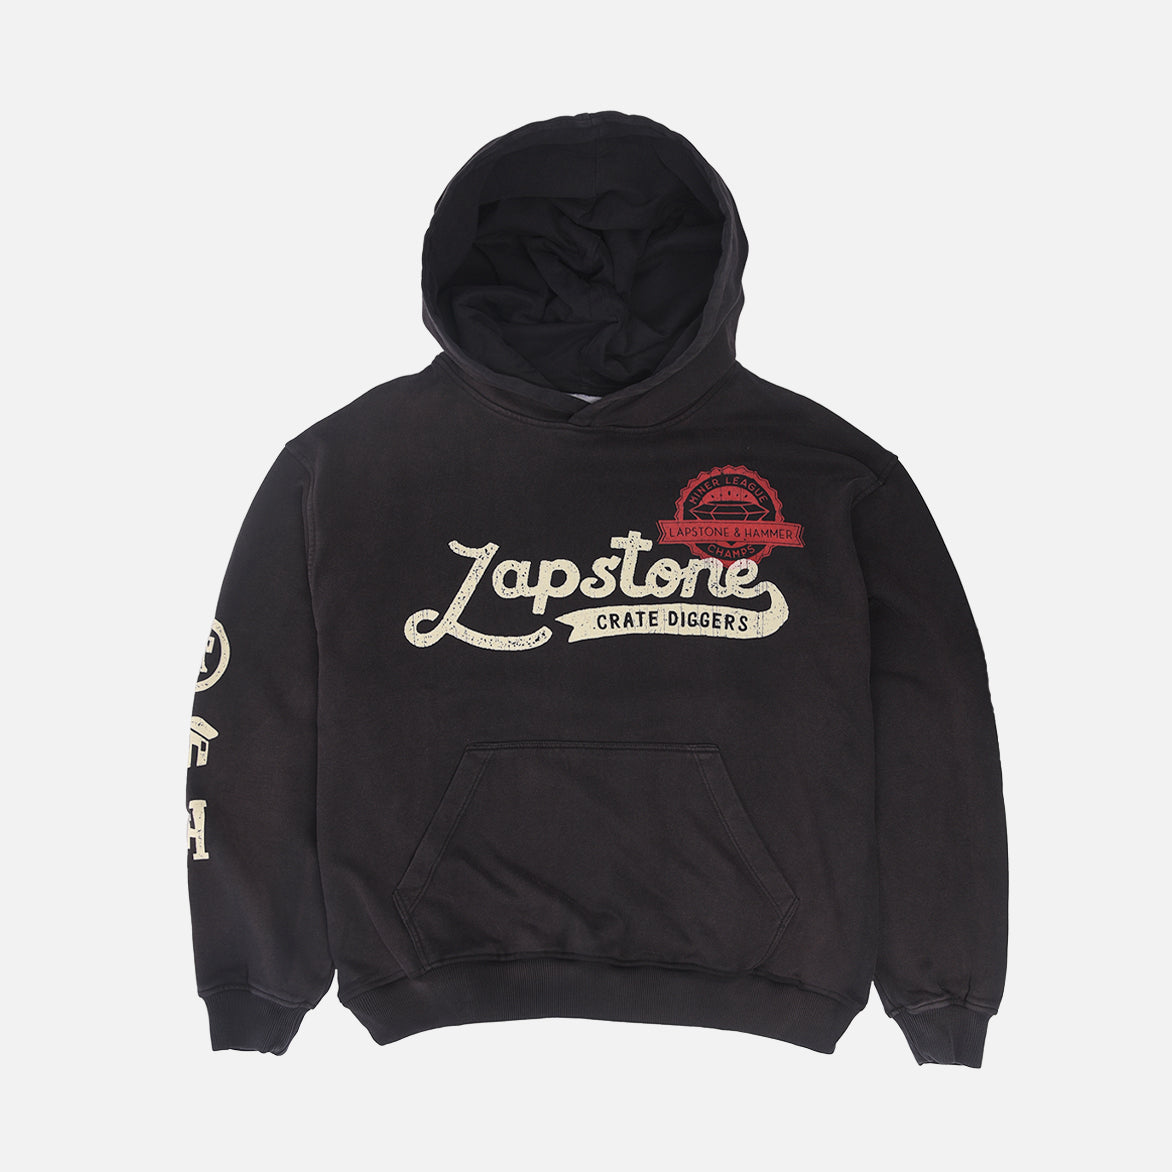 LAPSTONE X CRATE DIGGERS MINER LEAGUE CHAMPS HOODIE - BLACK